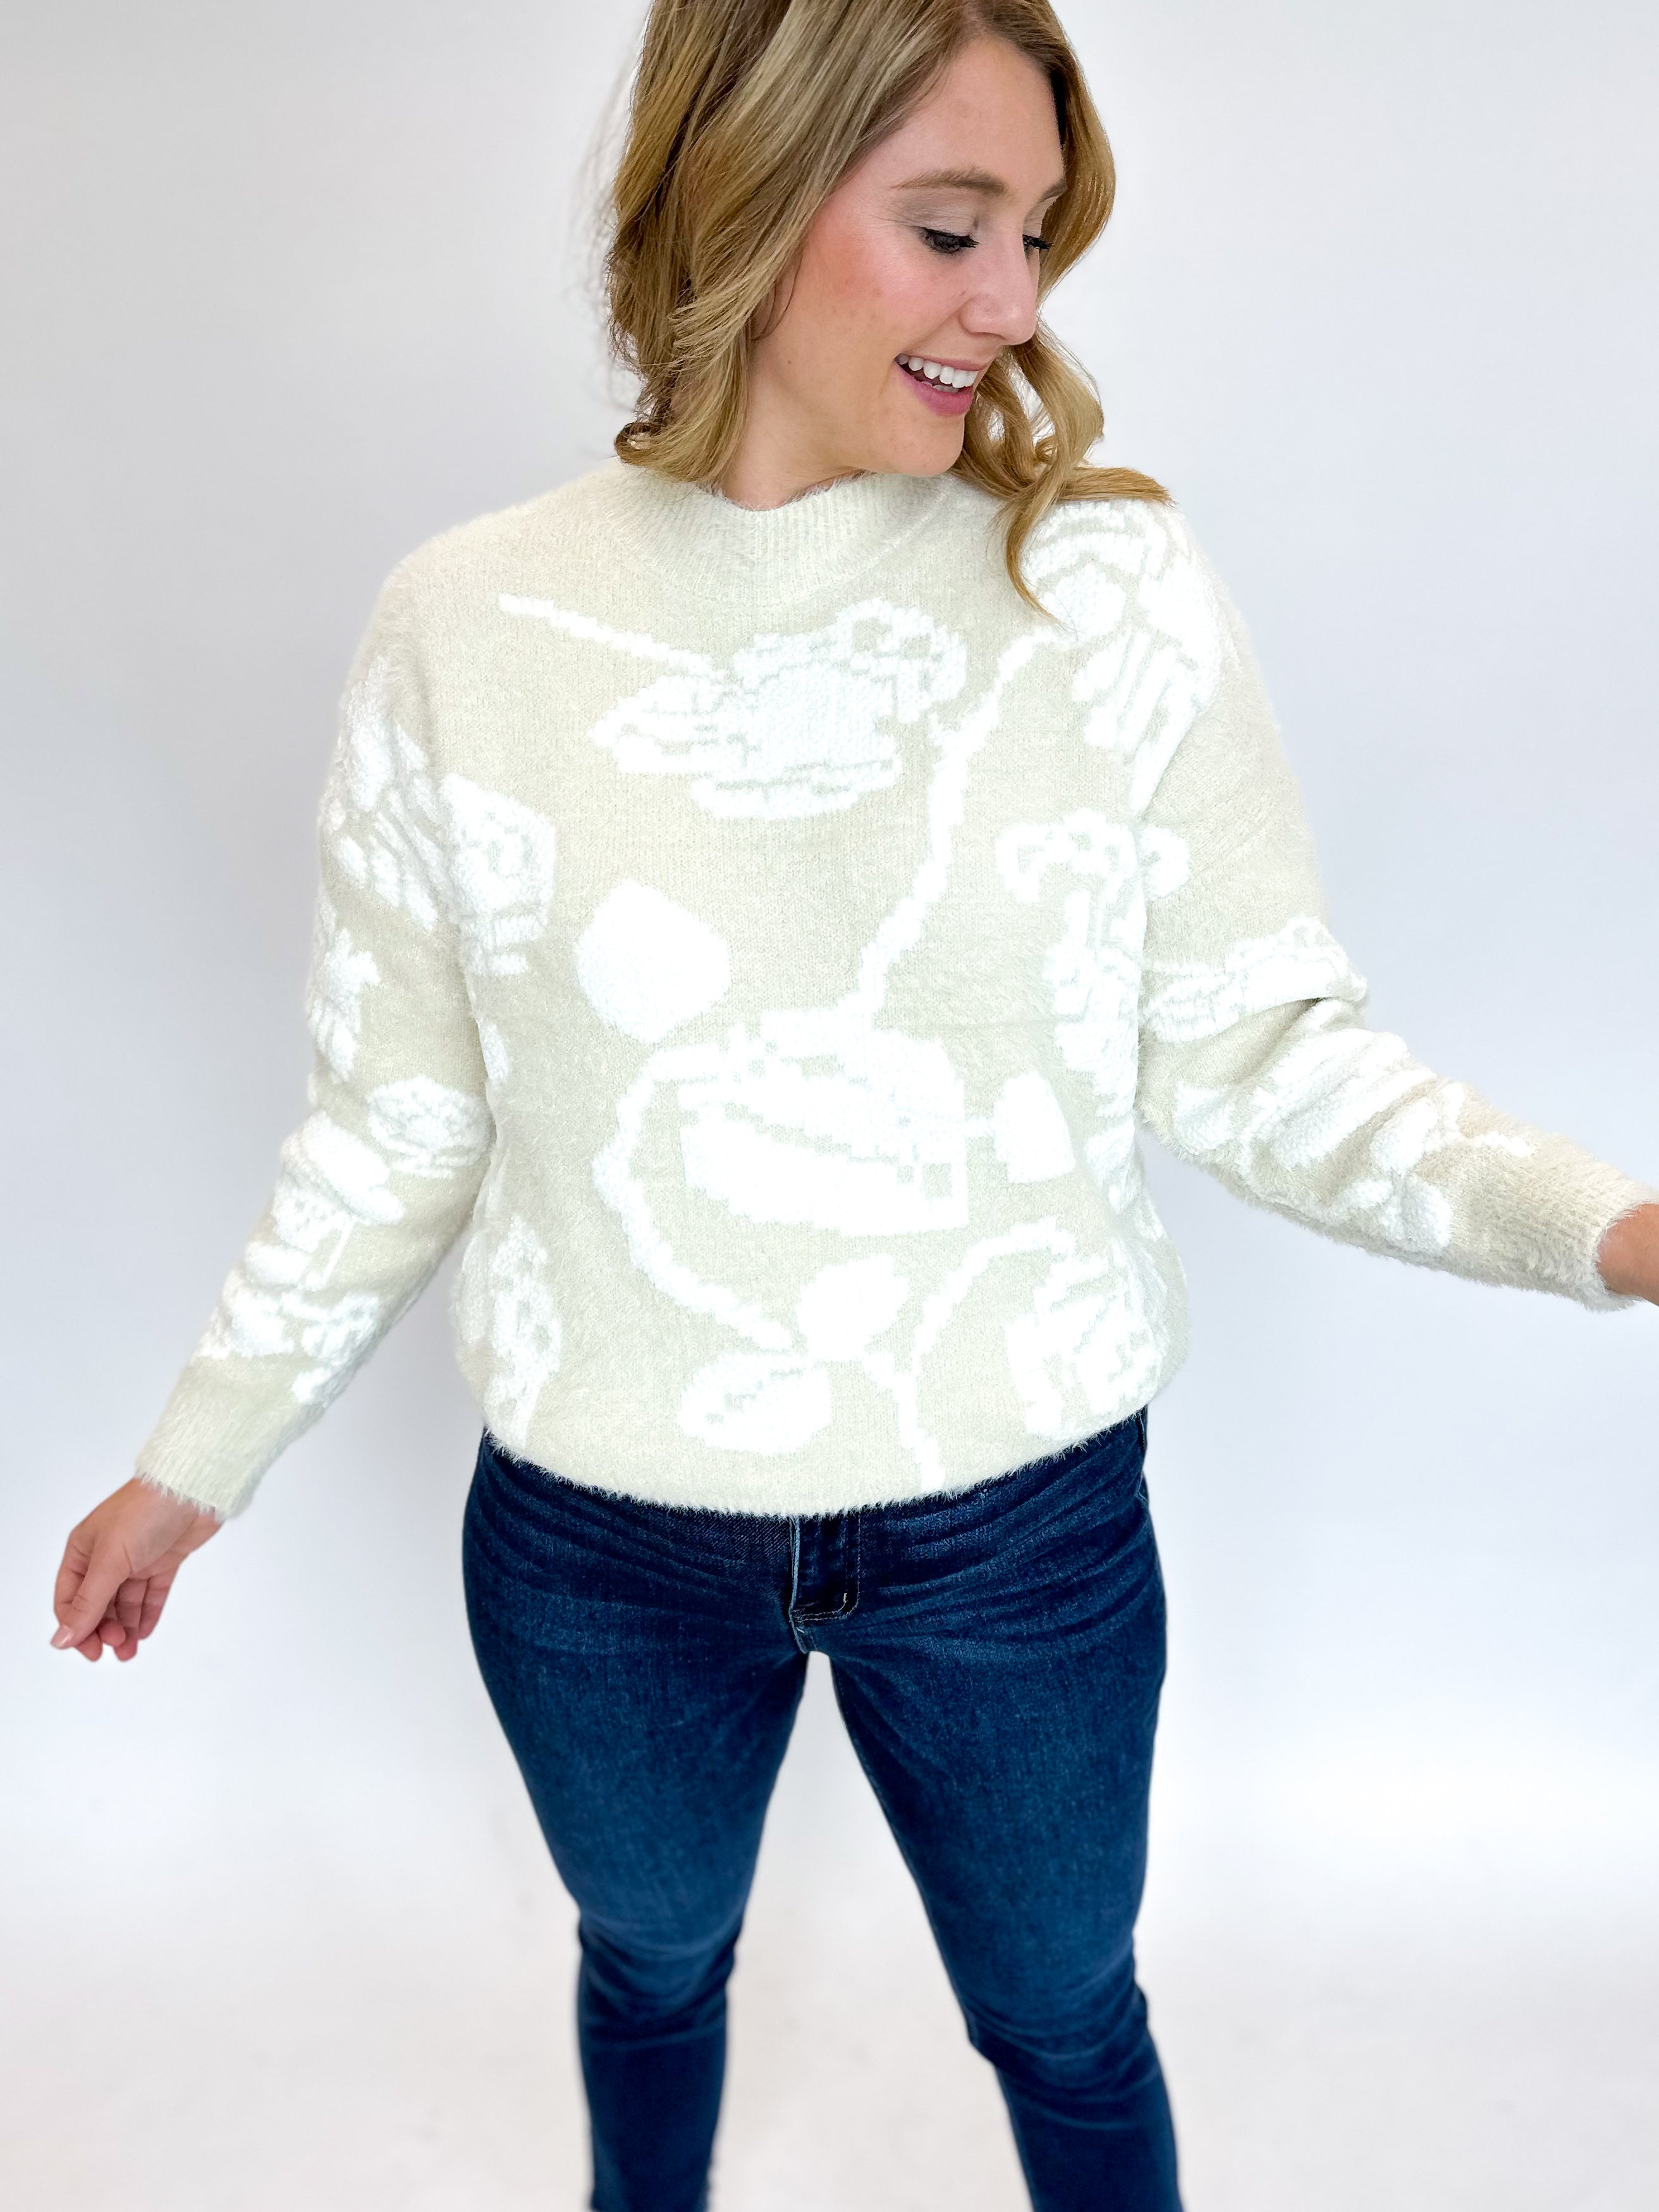 Feminine Floral Sweater Top-230 Sweaters/Cardis-SEE AND BE SEEN-July & June Women's Fashion Boutique Located in San Antonio, Texas